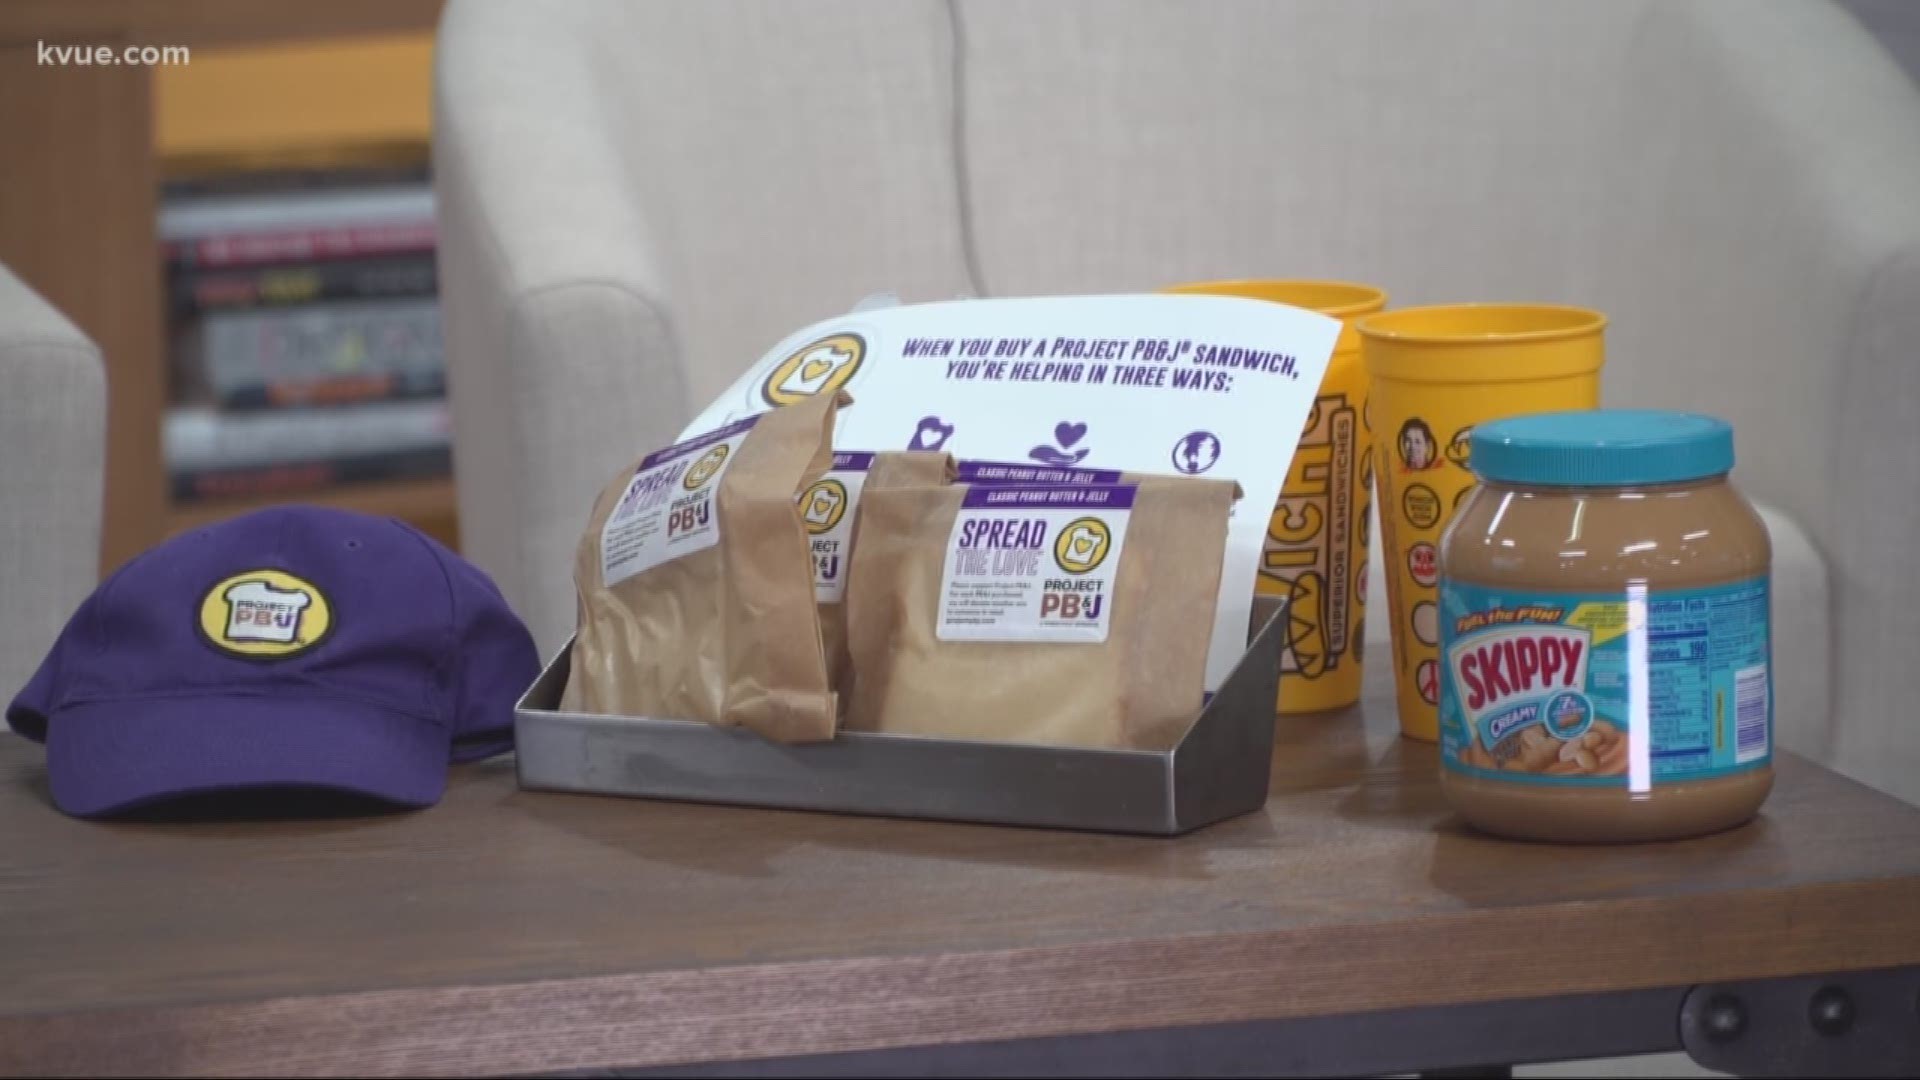 Joining us on KVUE is Which Wich Franchisee Jigar Sinojia to talk about Project PB & J. For every PB & J sandwich purchased at Which Wich, a PB&J sandwich is donated to a local cause and another is banked for the global fund to assist situations with a larger scale need.